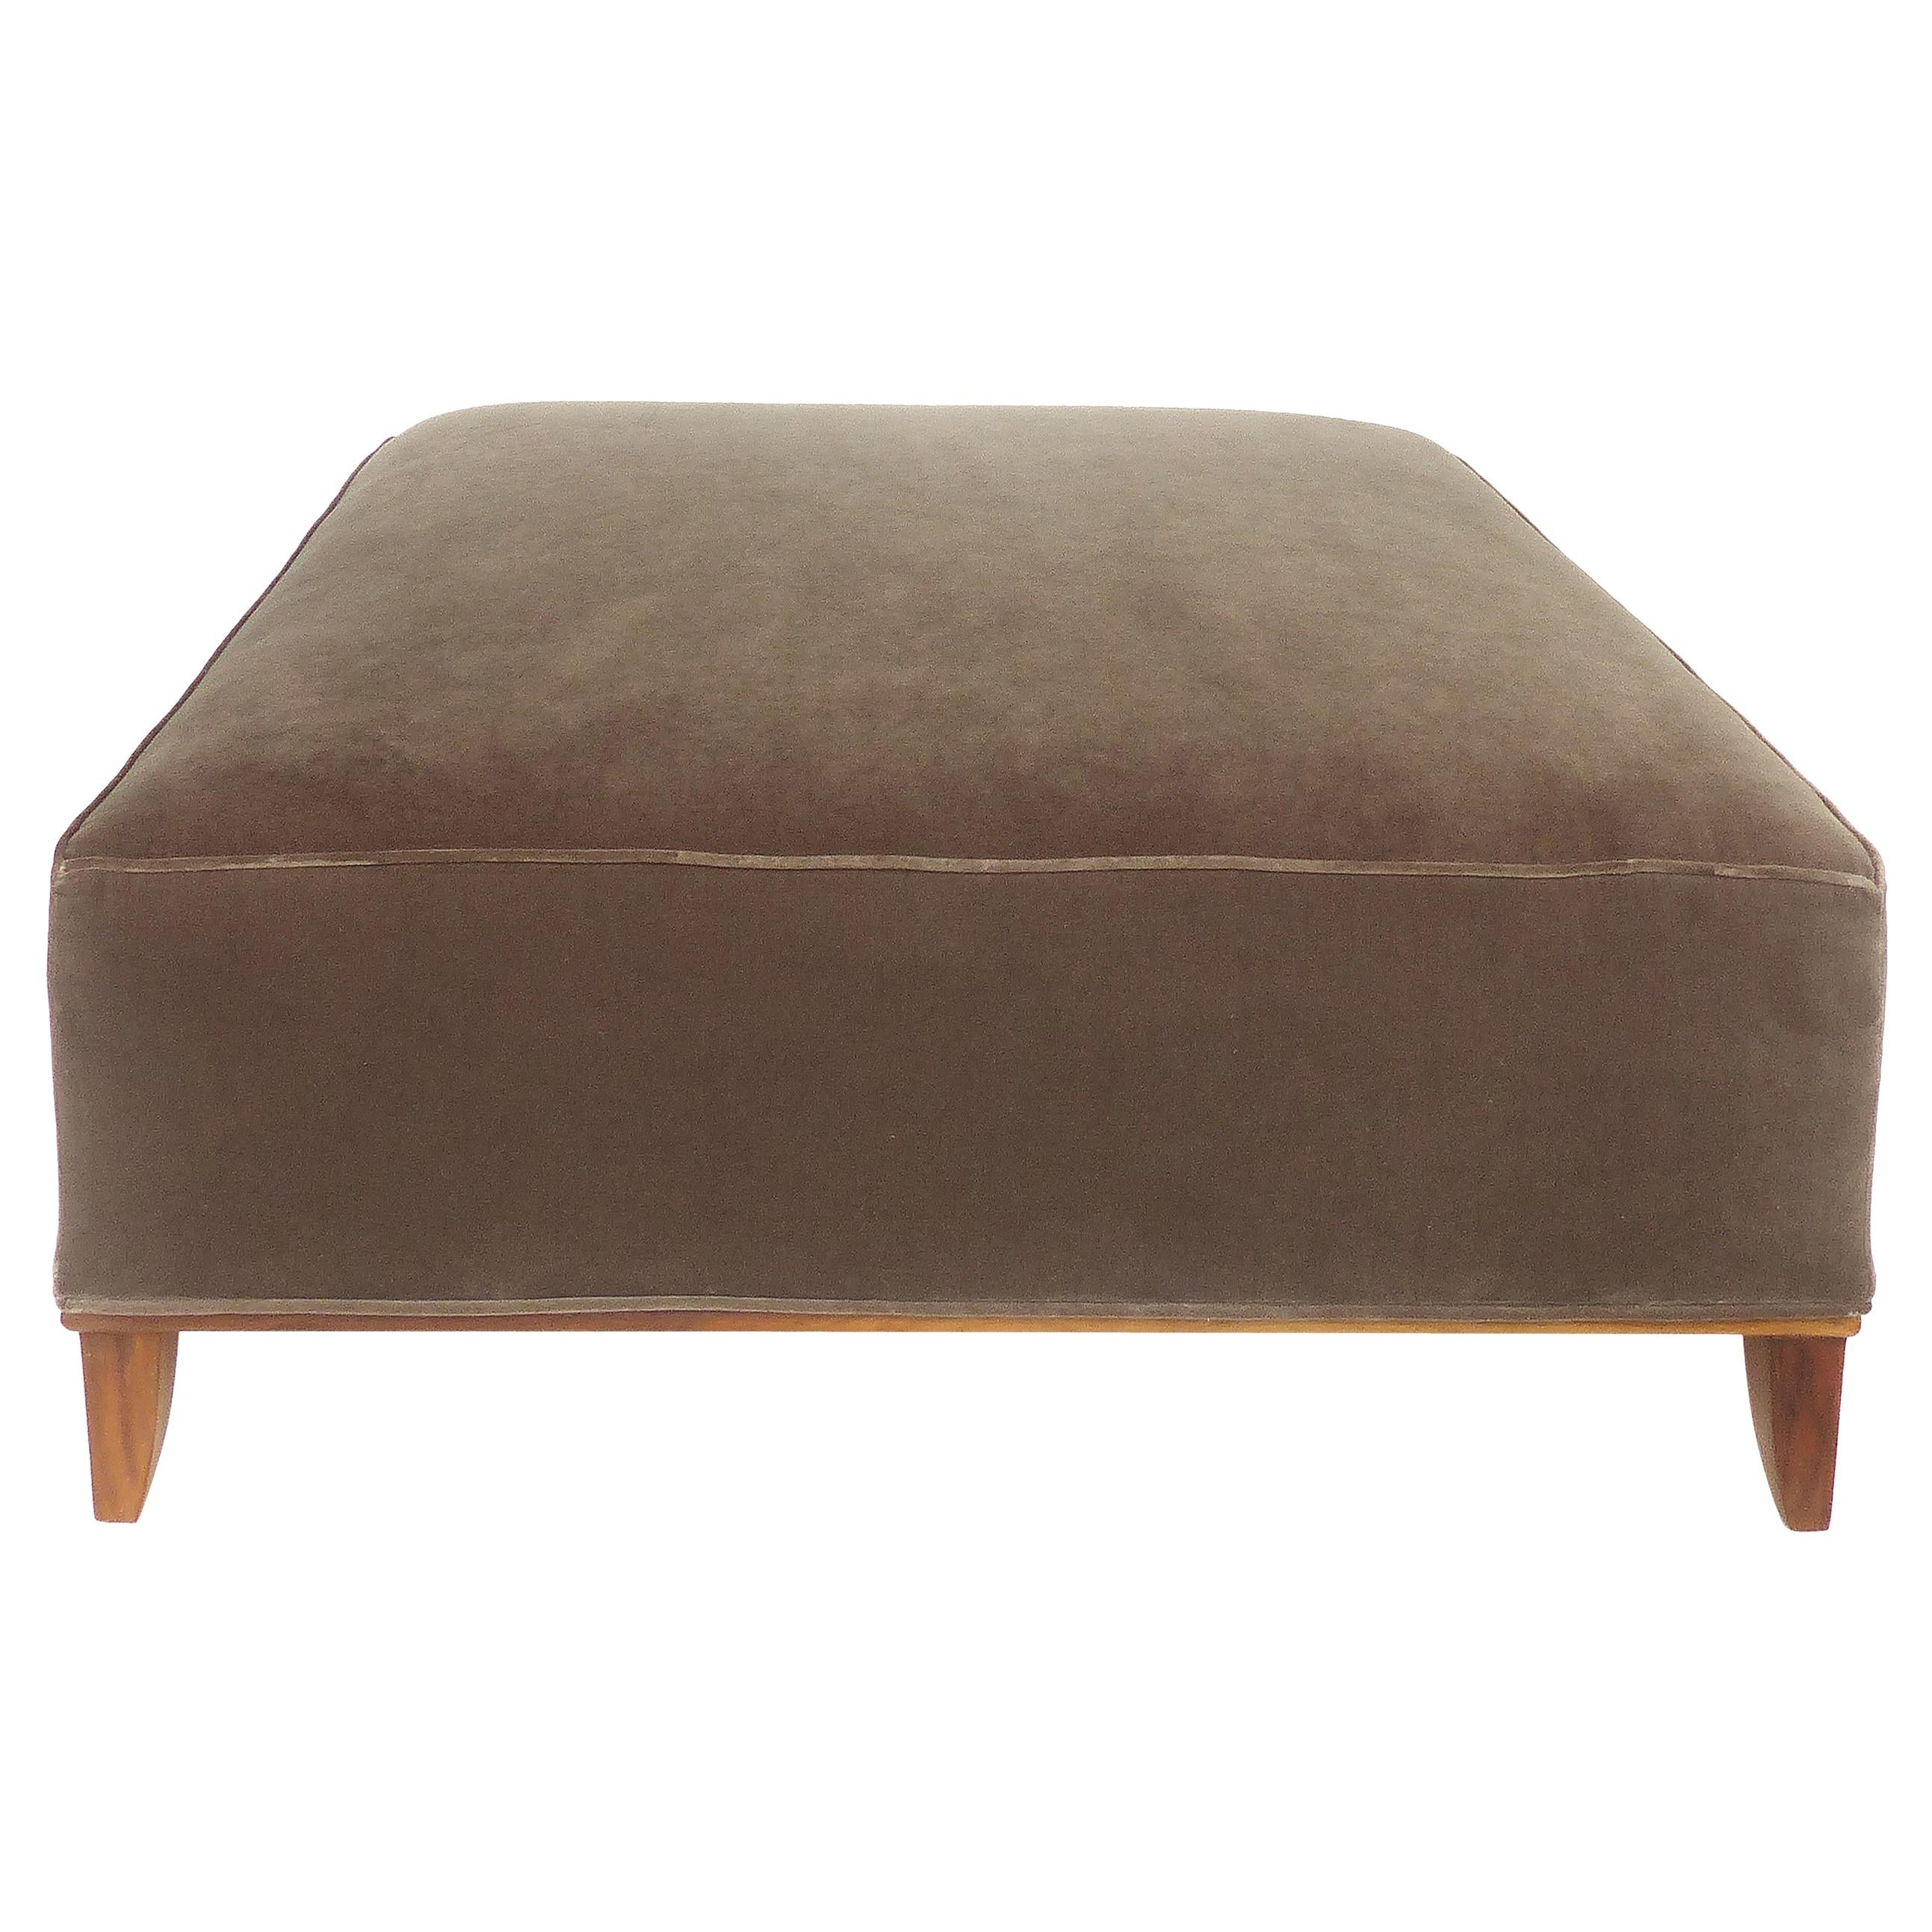 Mid-Century Modern Mohair Upholstered Ottoman with Wood Base